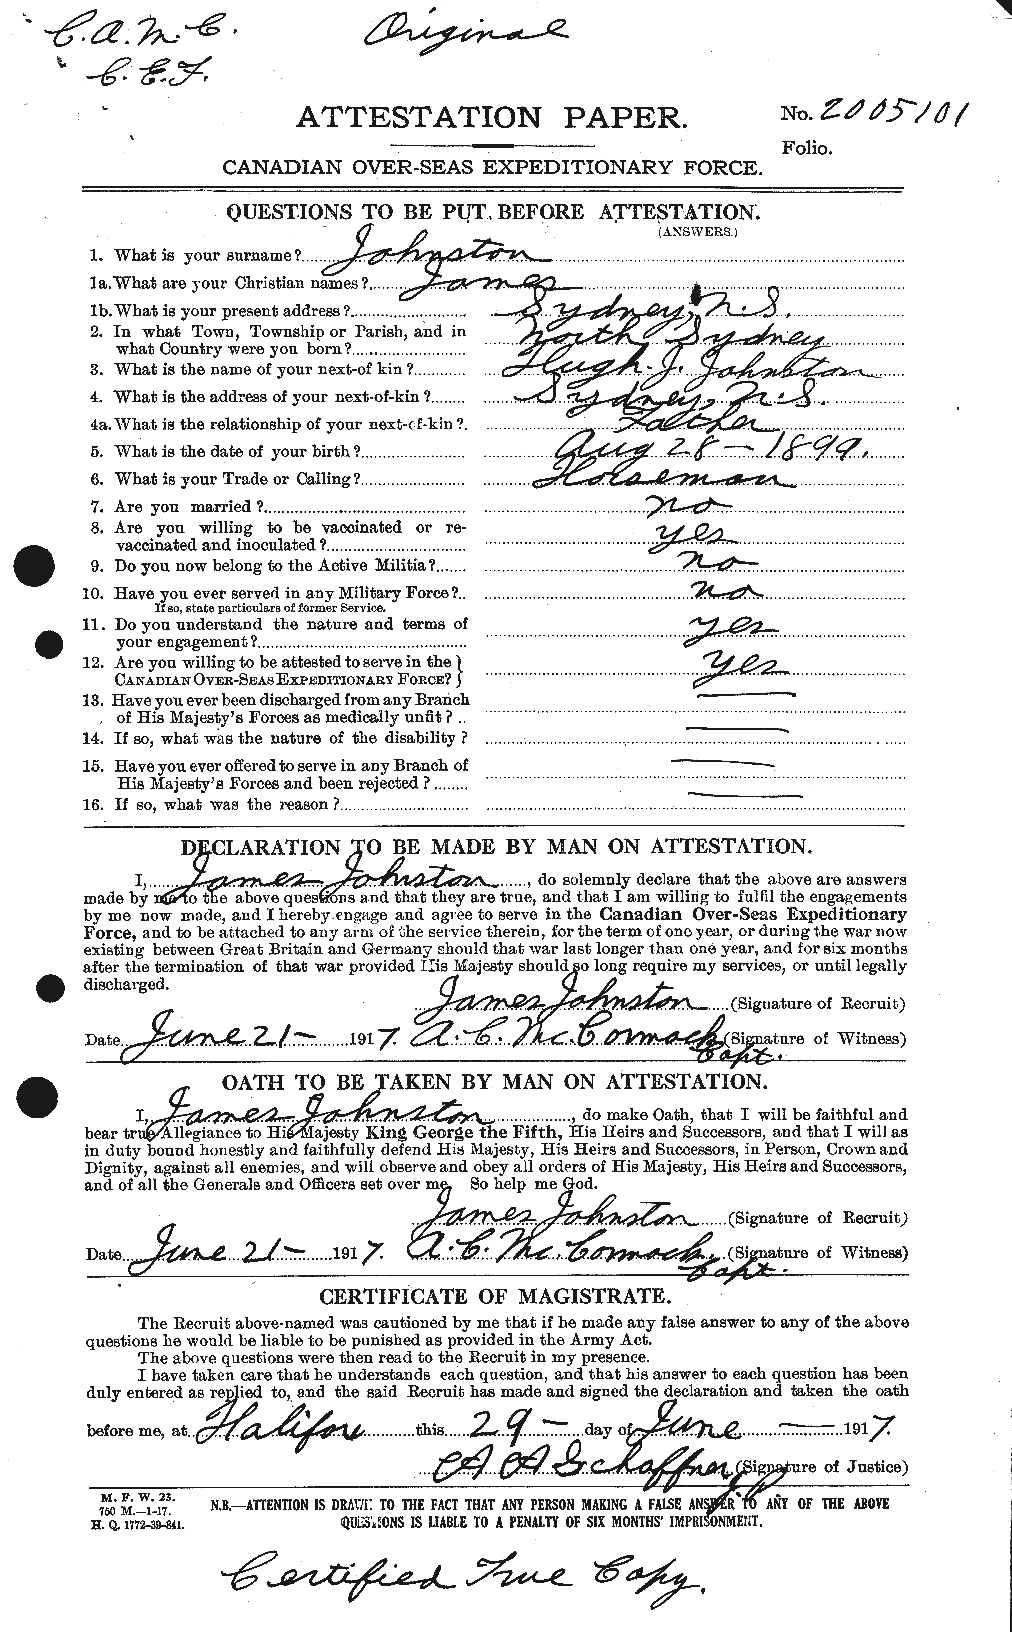 Personnel Records of the First World War - CEF 422703a